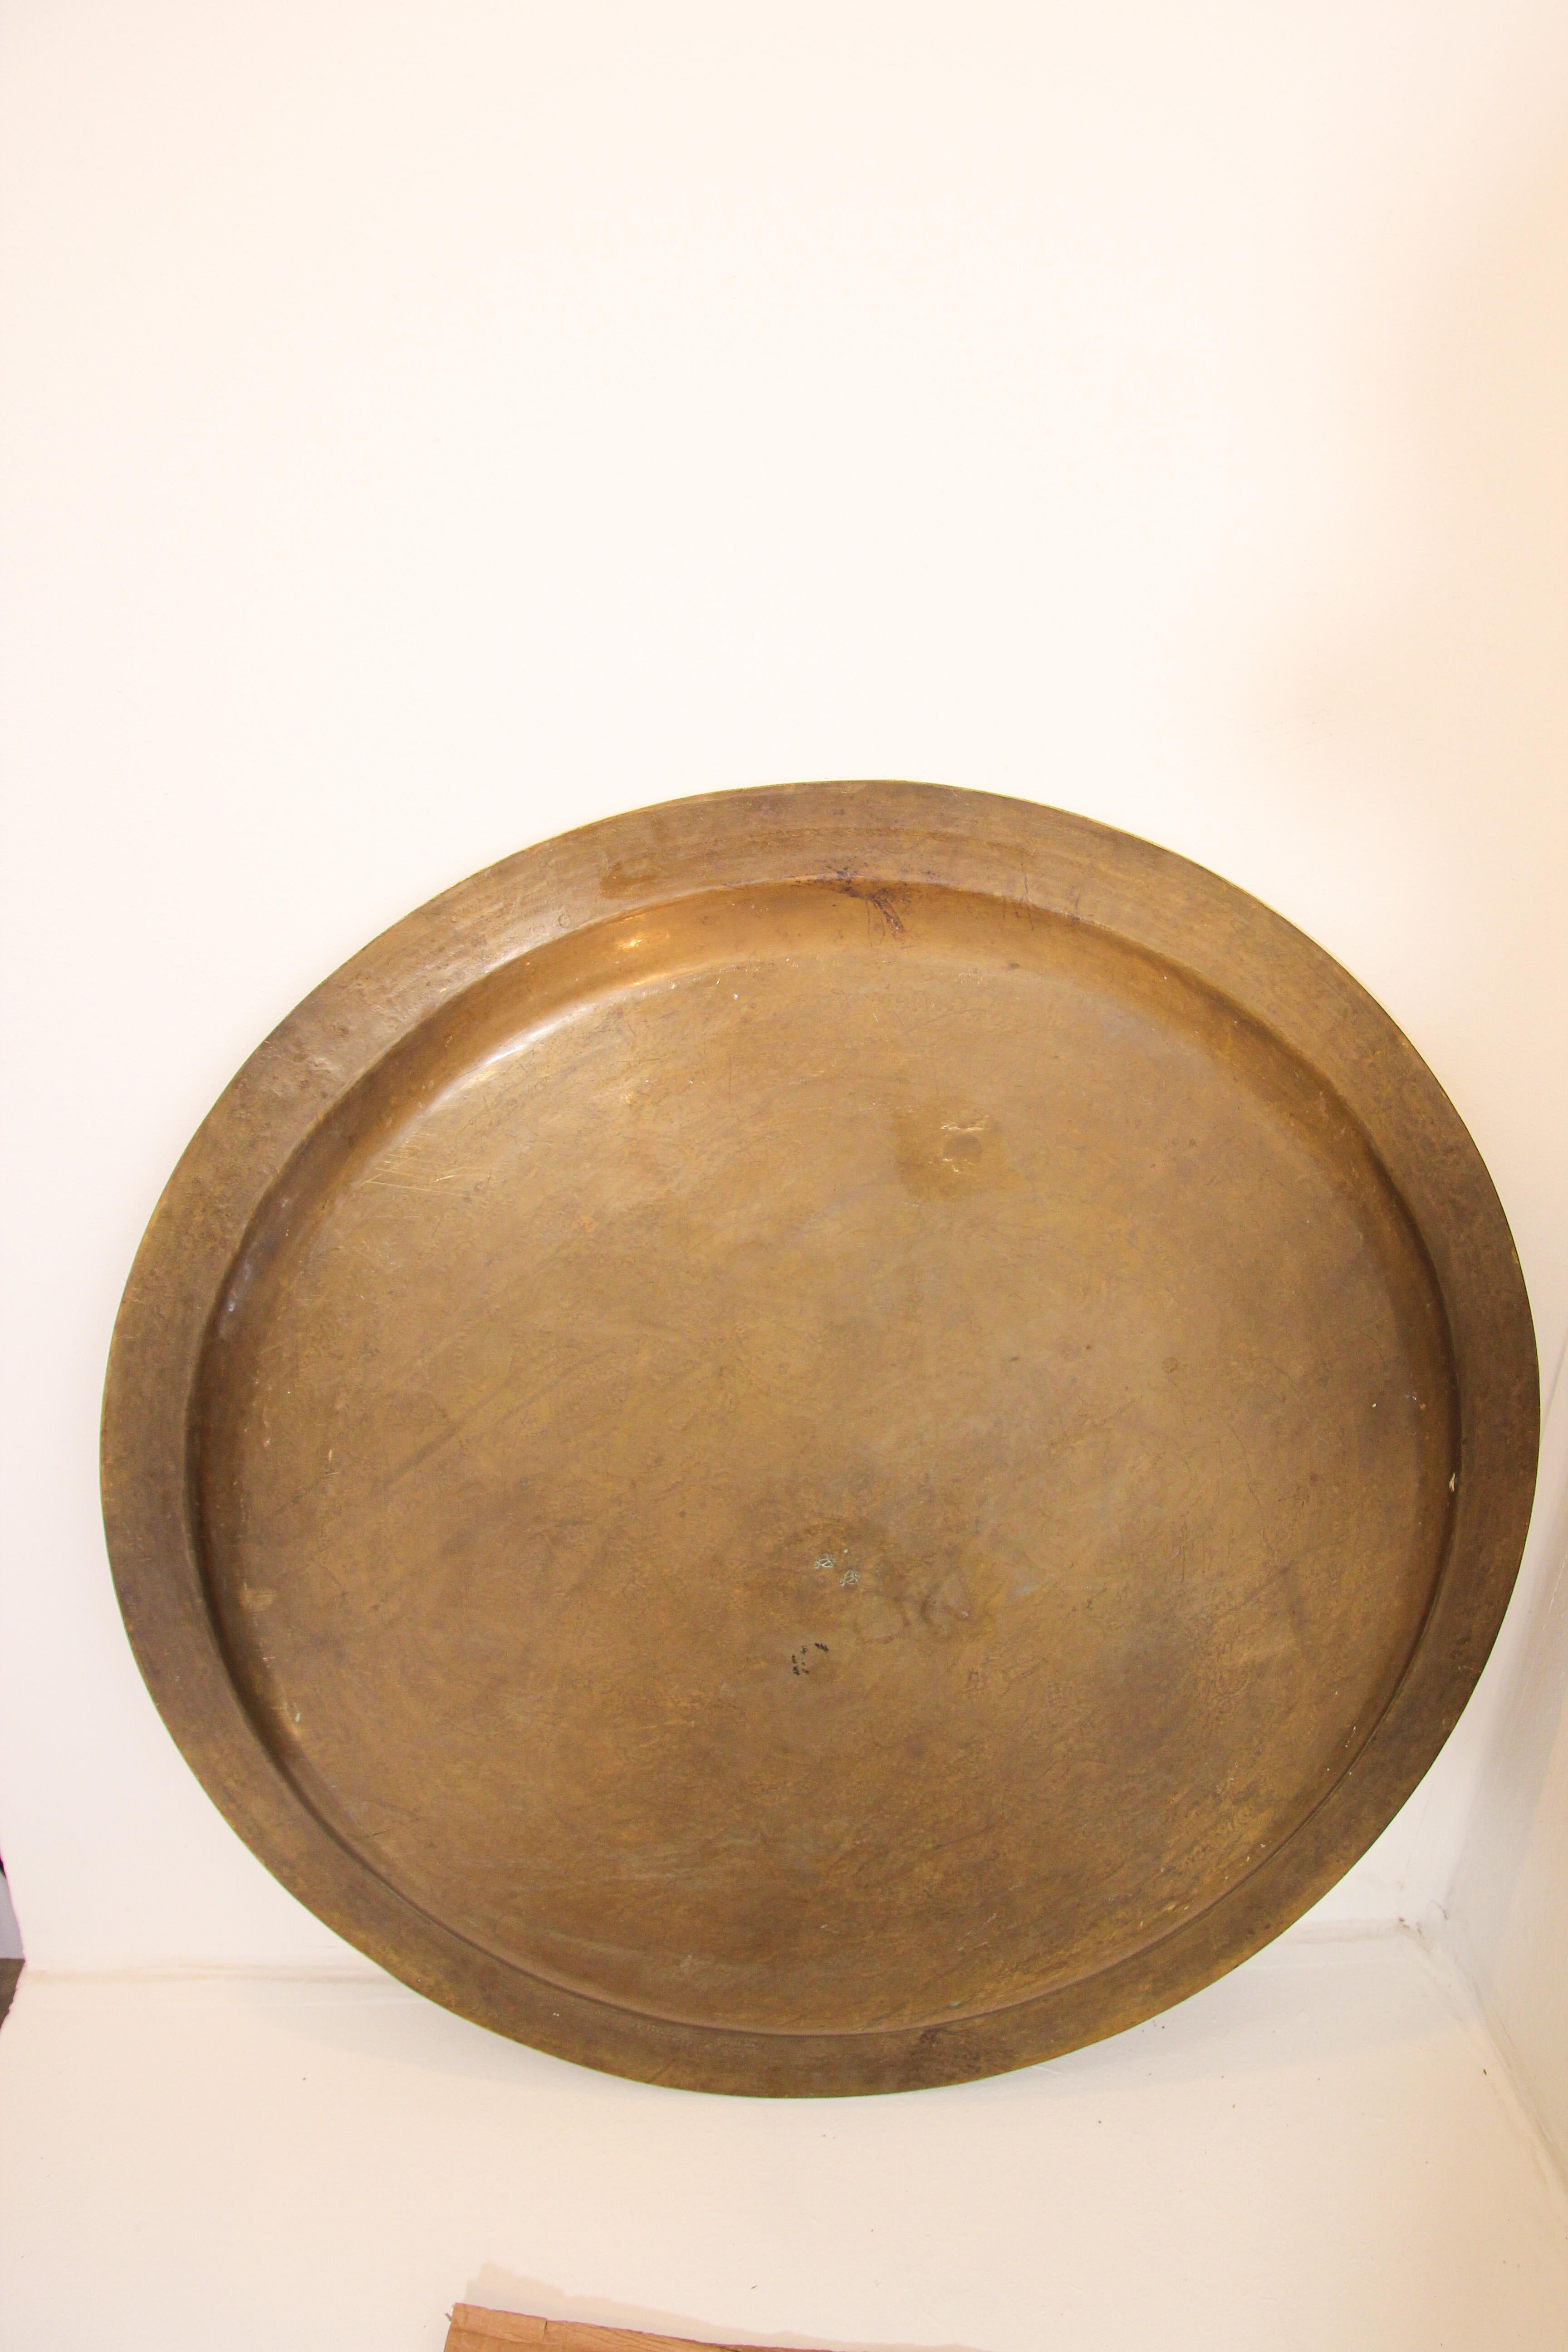 Moroccan Antique Large Polished Round Brass Tray Platter 36 Inc. 7